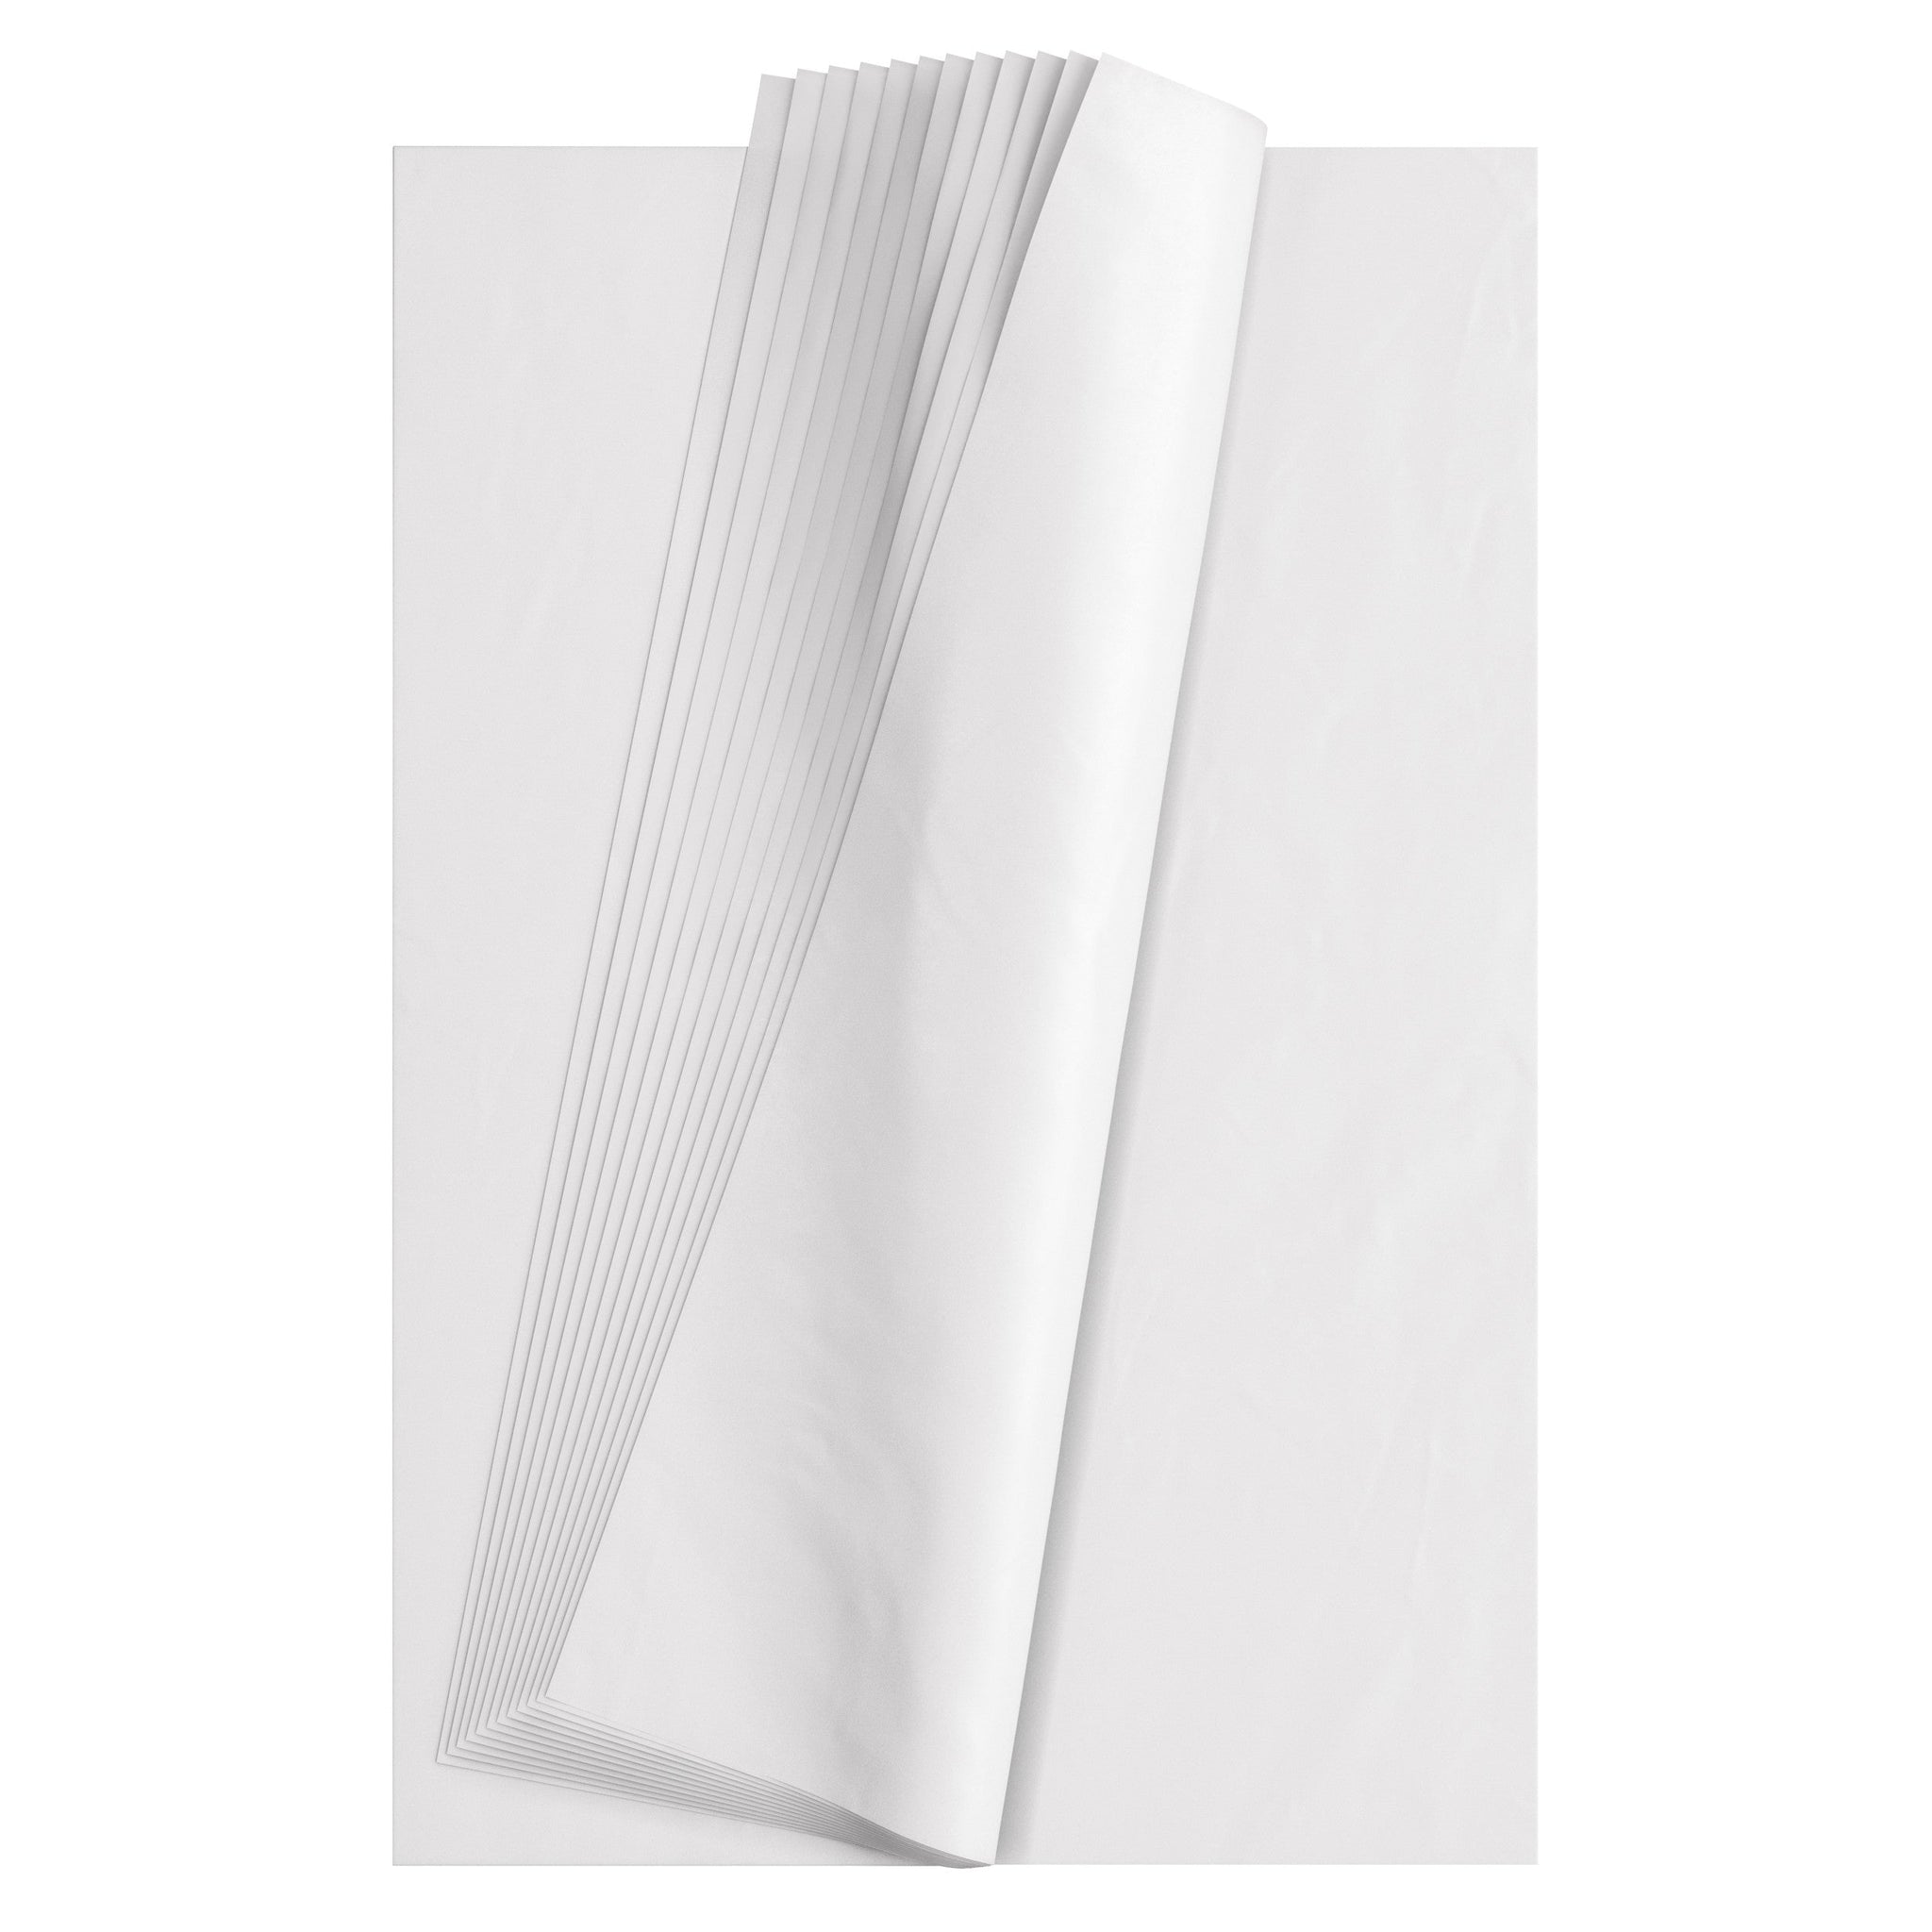 Wholesale White Tissue Paper in Bulk - 20x30 inch - 960 Sheets